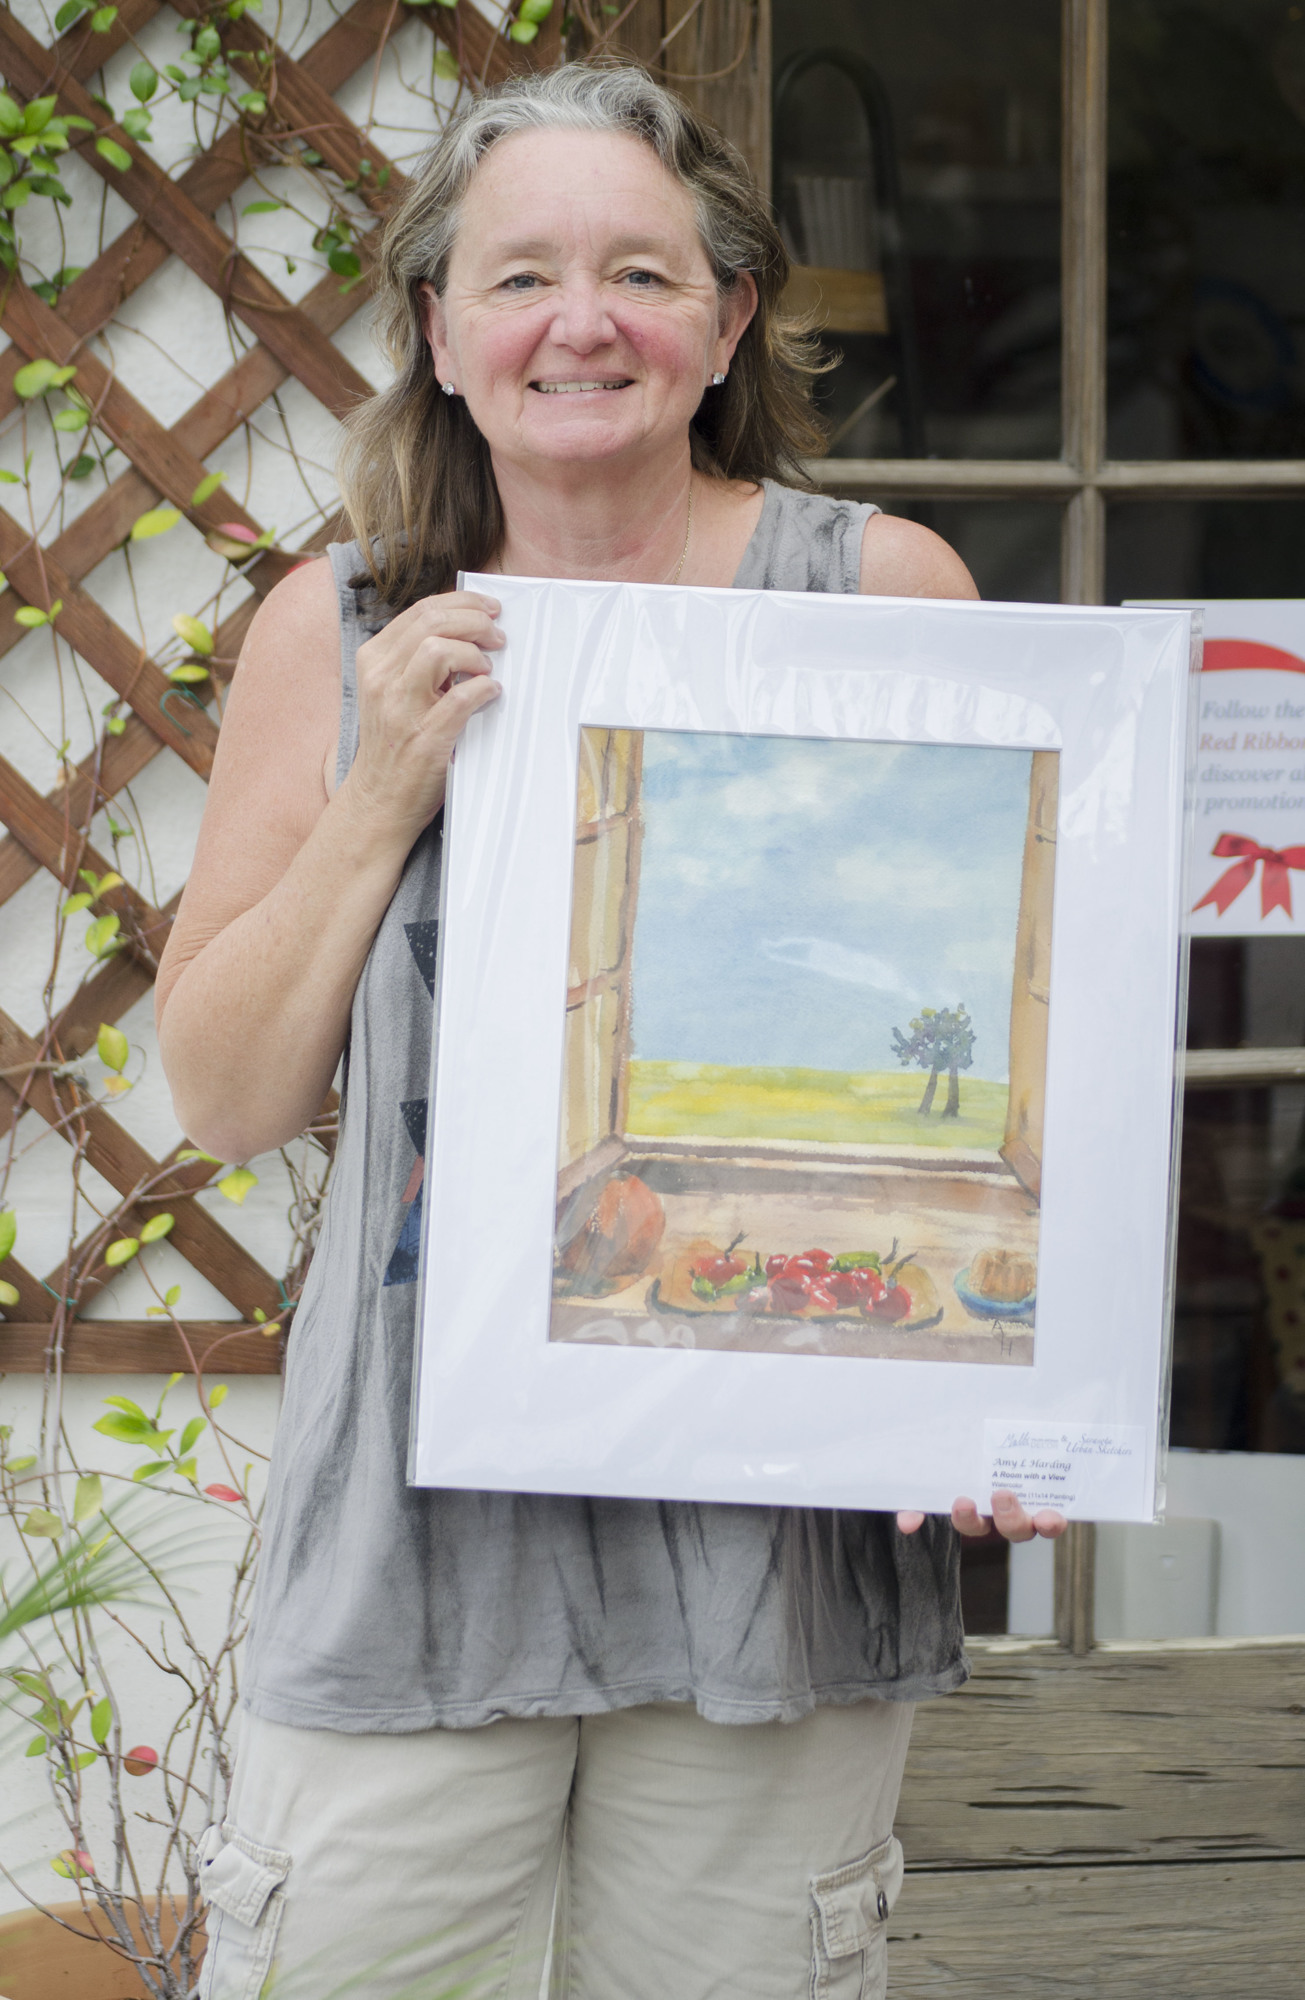 Amy Harding holds one of her submissions to the sale.